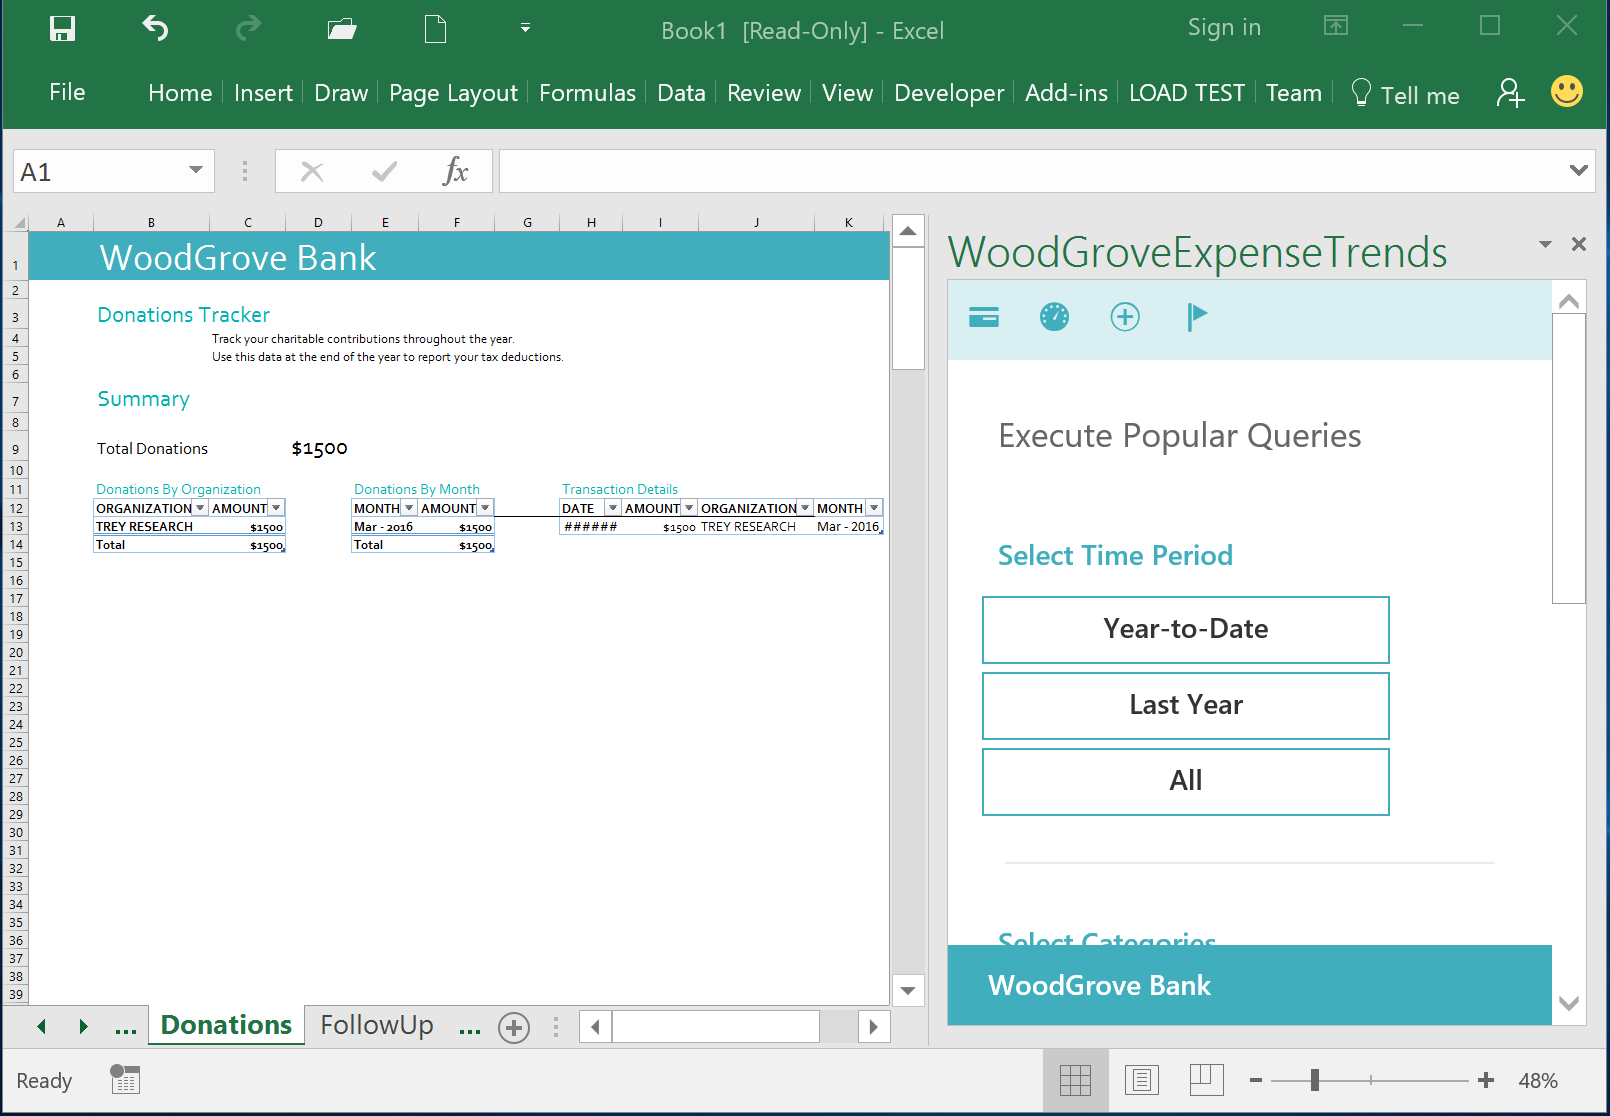 WoodGrove Bank Expense Trends Add-in - Donations Tracker